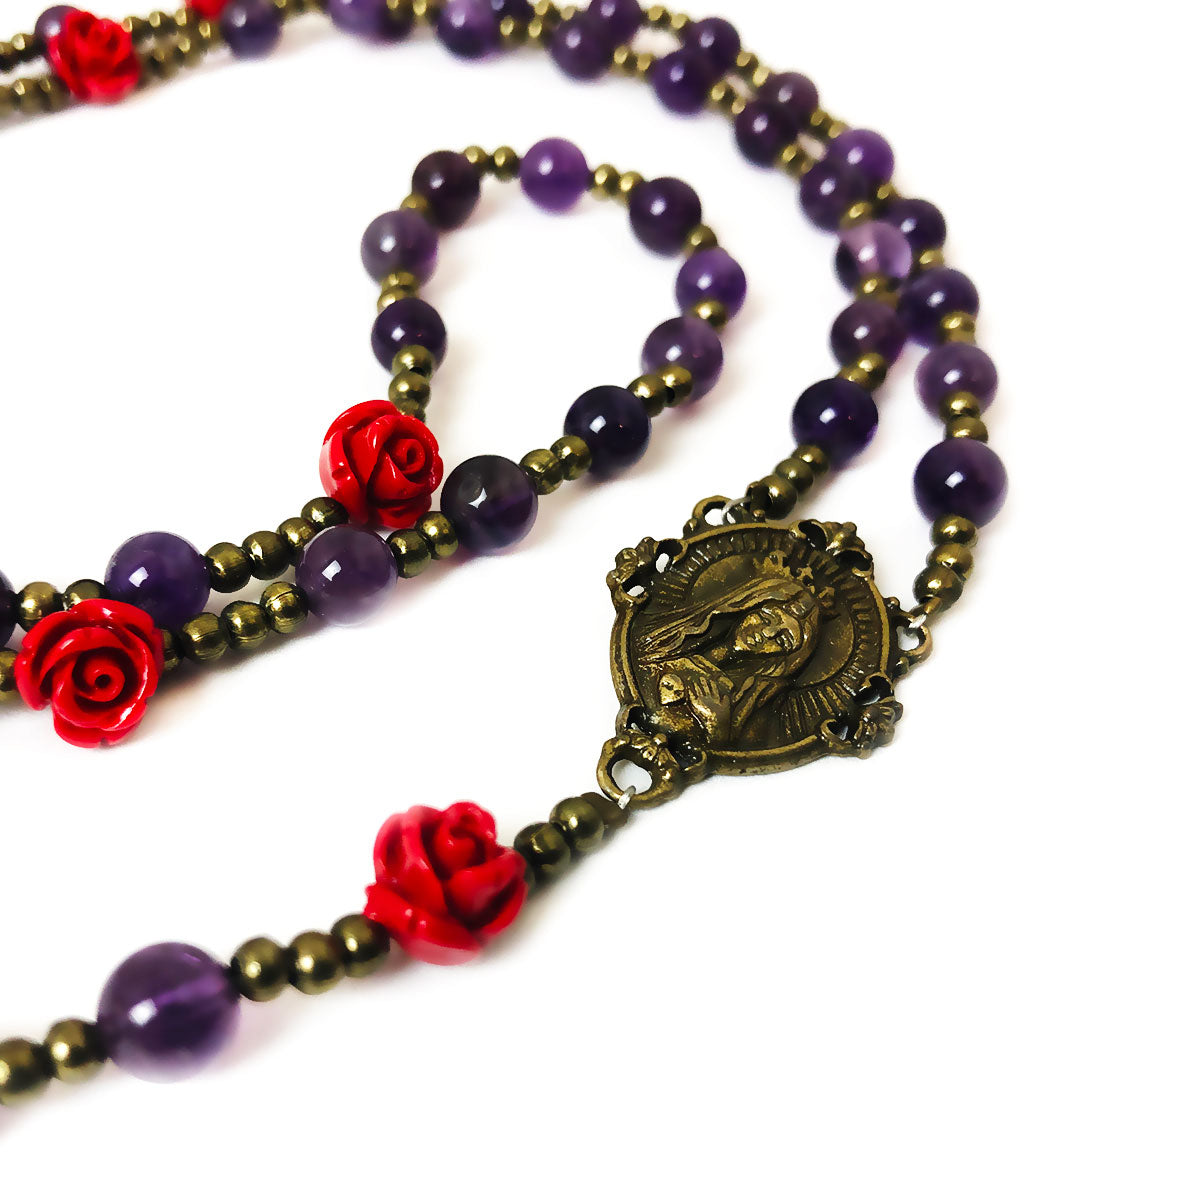 Immaculate Heart of Mary Purple Amethyst Stone Rosary and Bracelet Set by Catholic Heirlooms